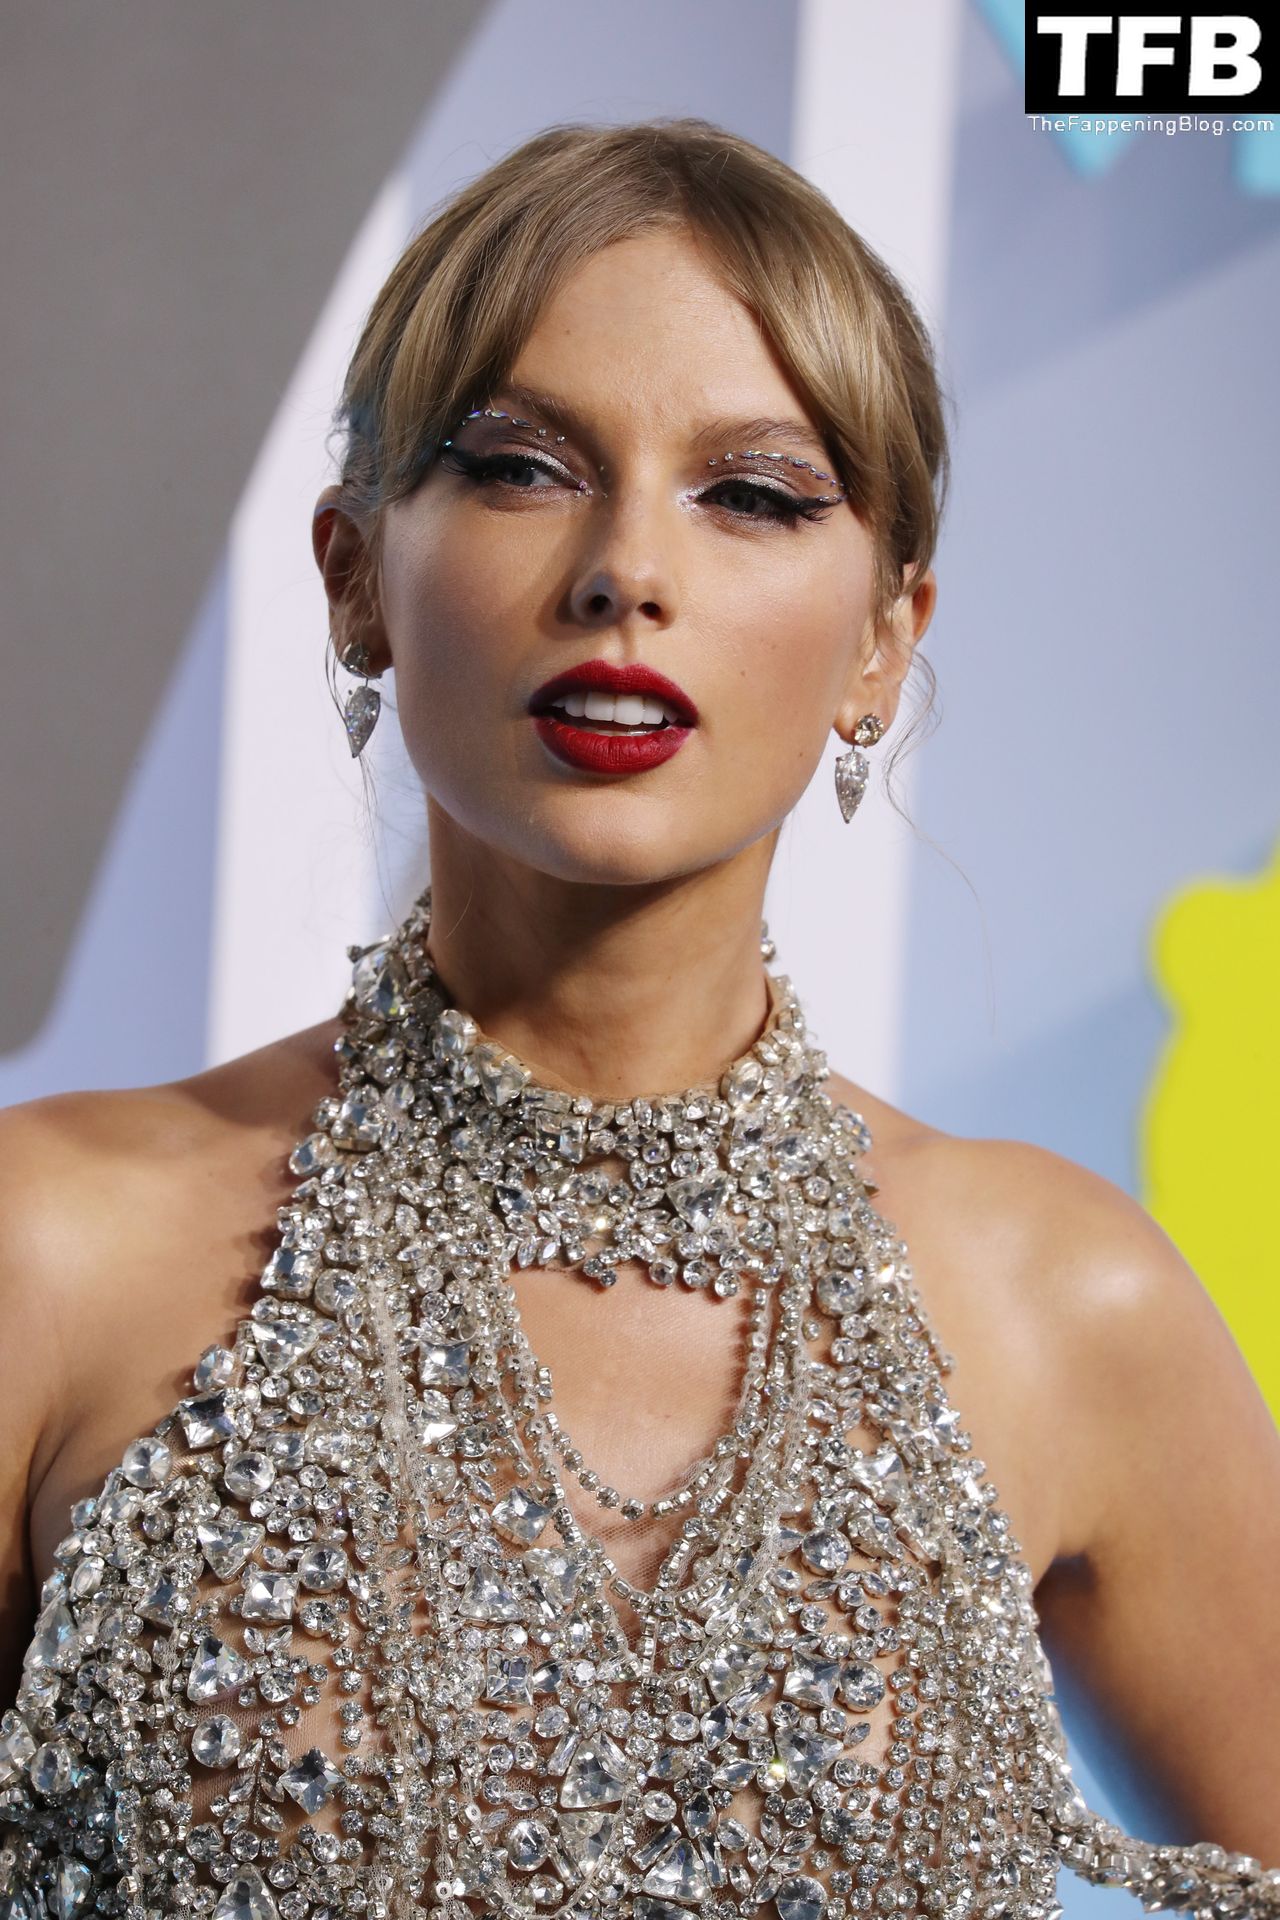 Taylor-Swift-Sexy-The-Fappening-Blog-86.jpg